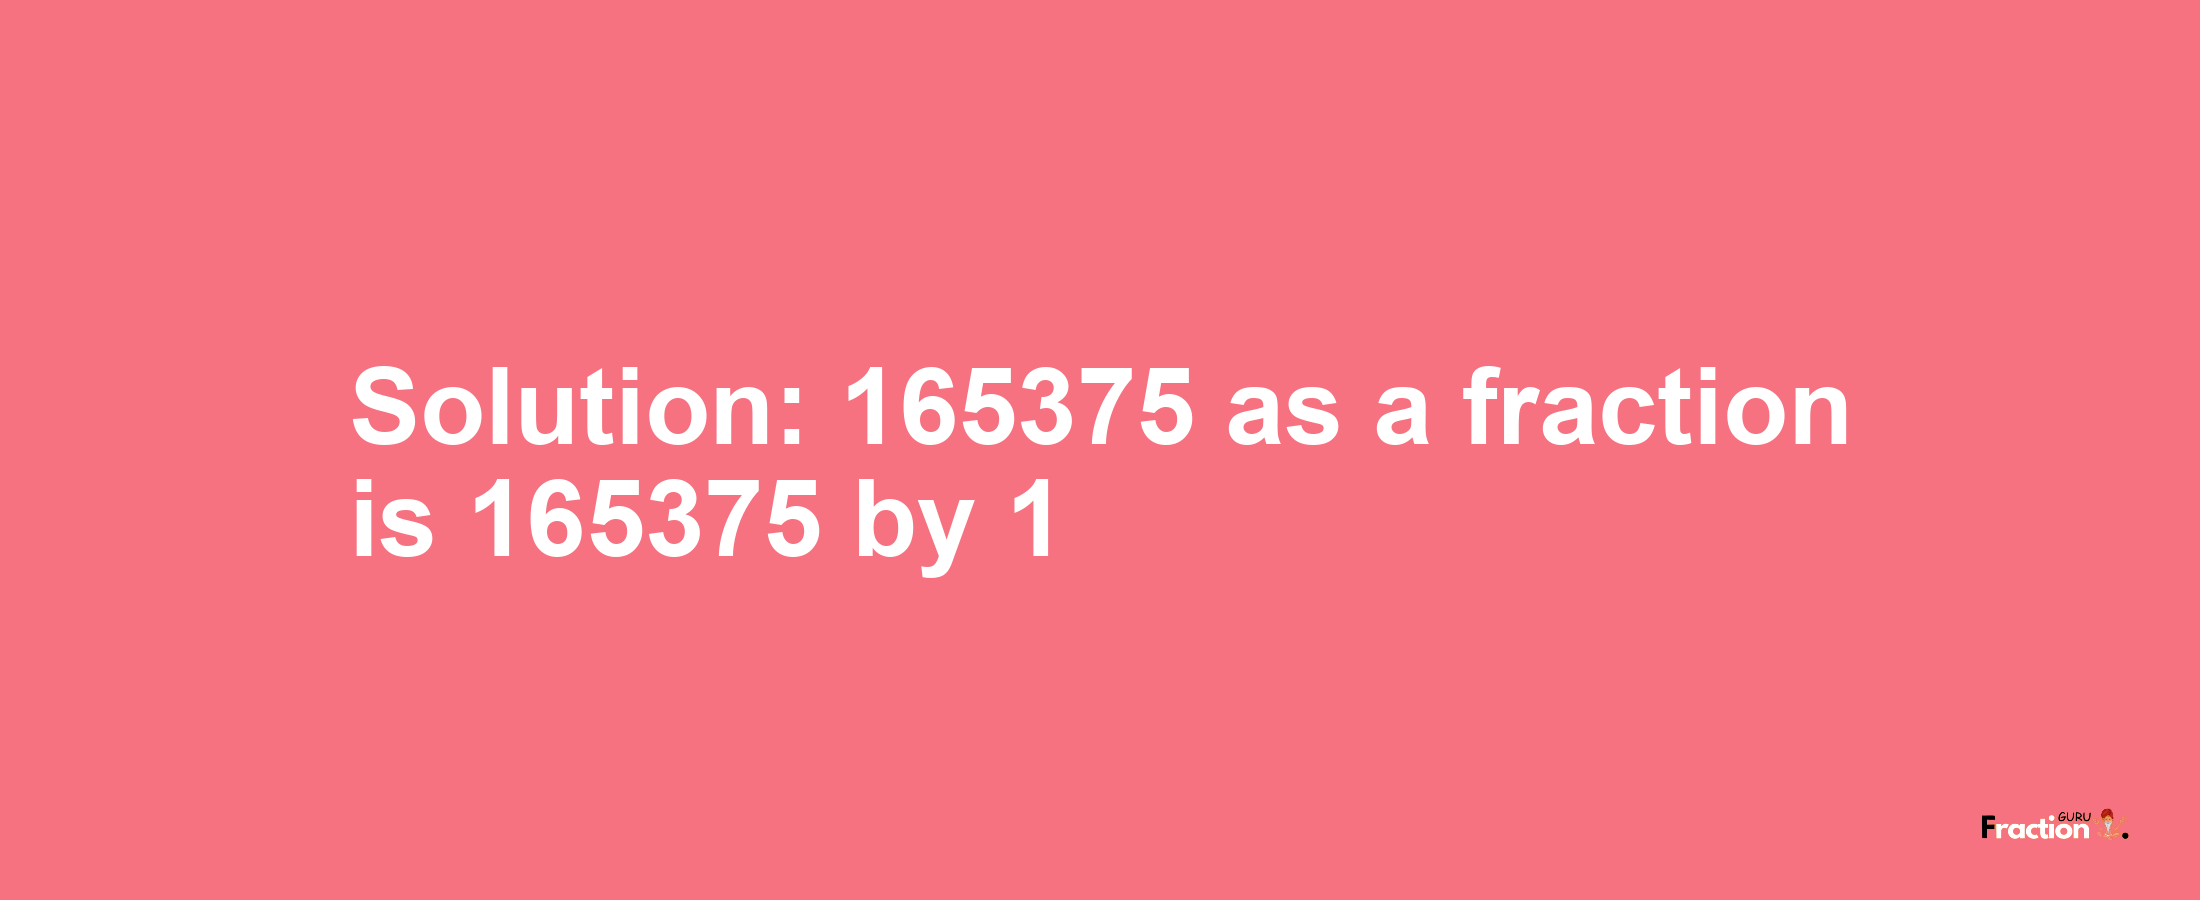 Solution:165375 as a fraction is 165375/1